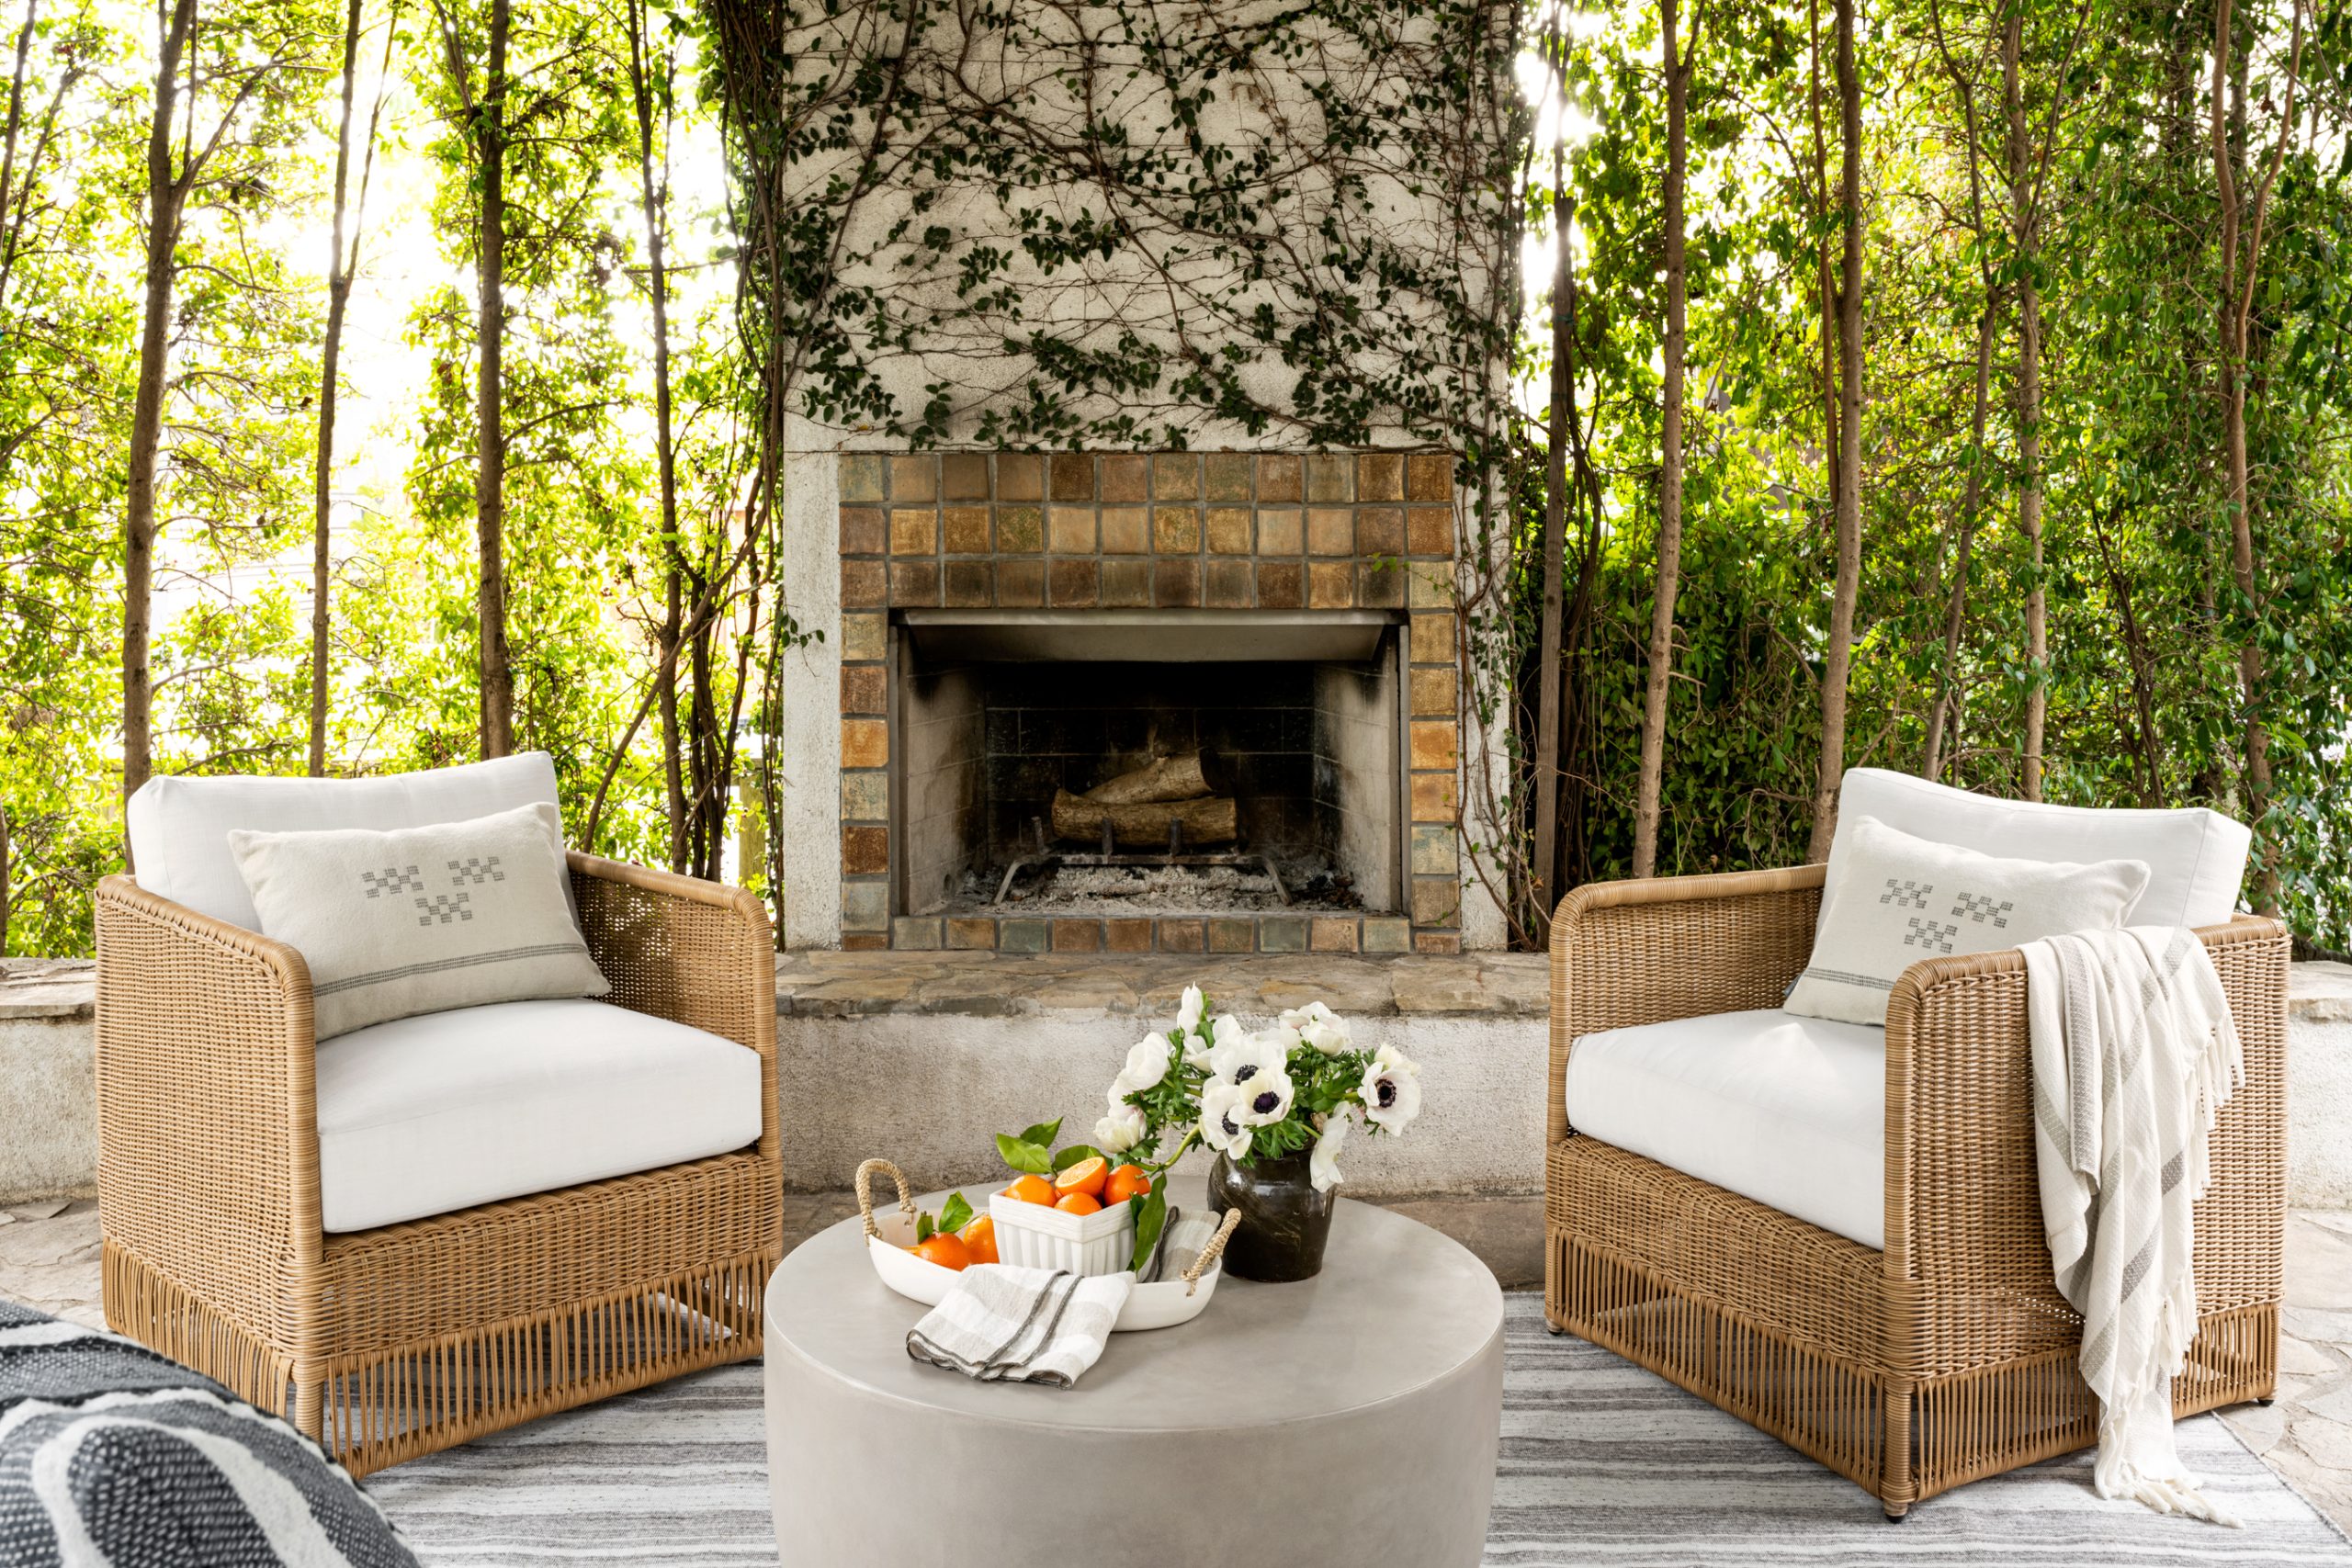 wicker lounge chairs with rug in front of outdoor fireplace